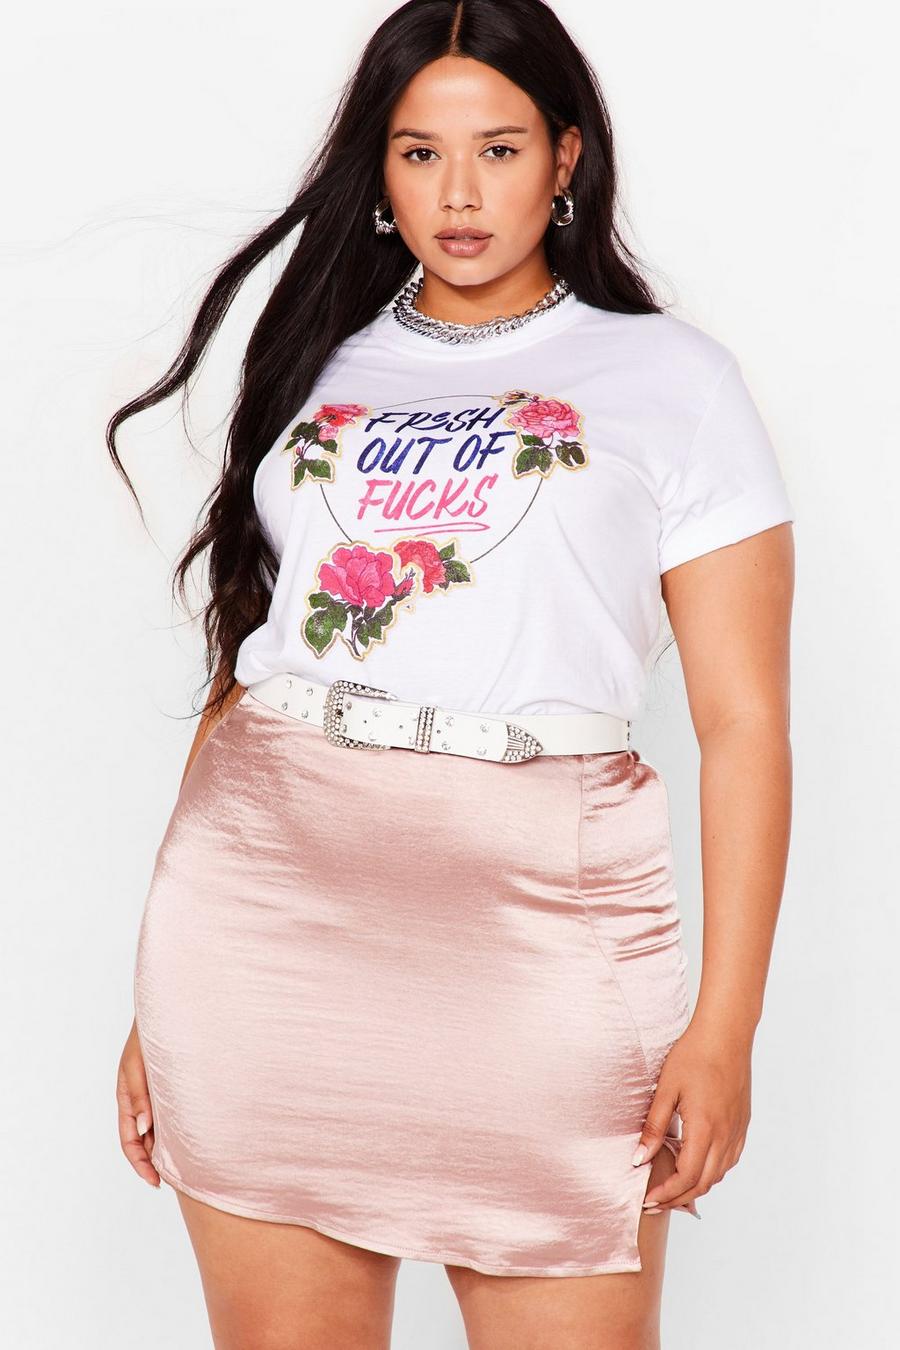 Plus Size Fresh Out of Fucks Graphic T-Shirt